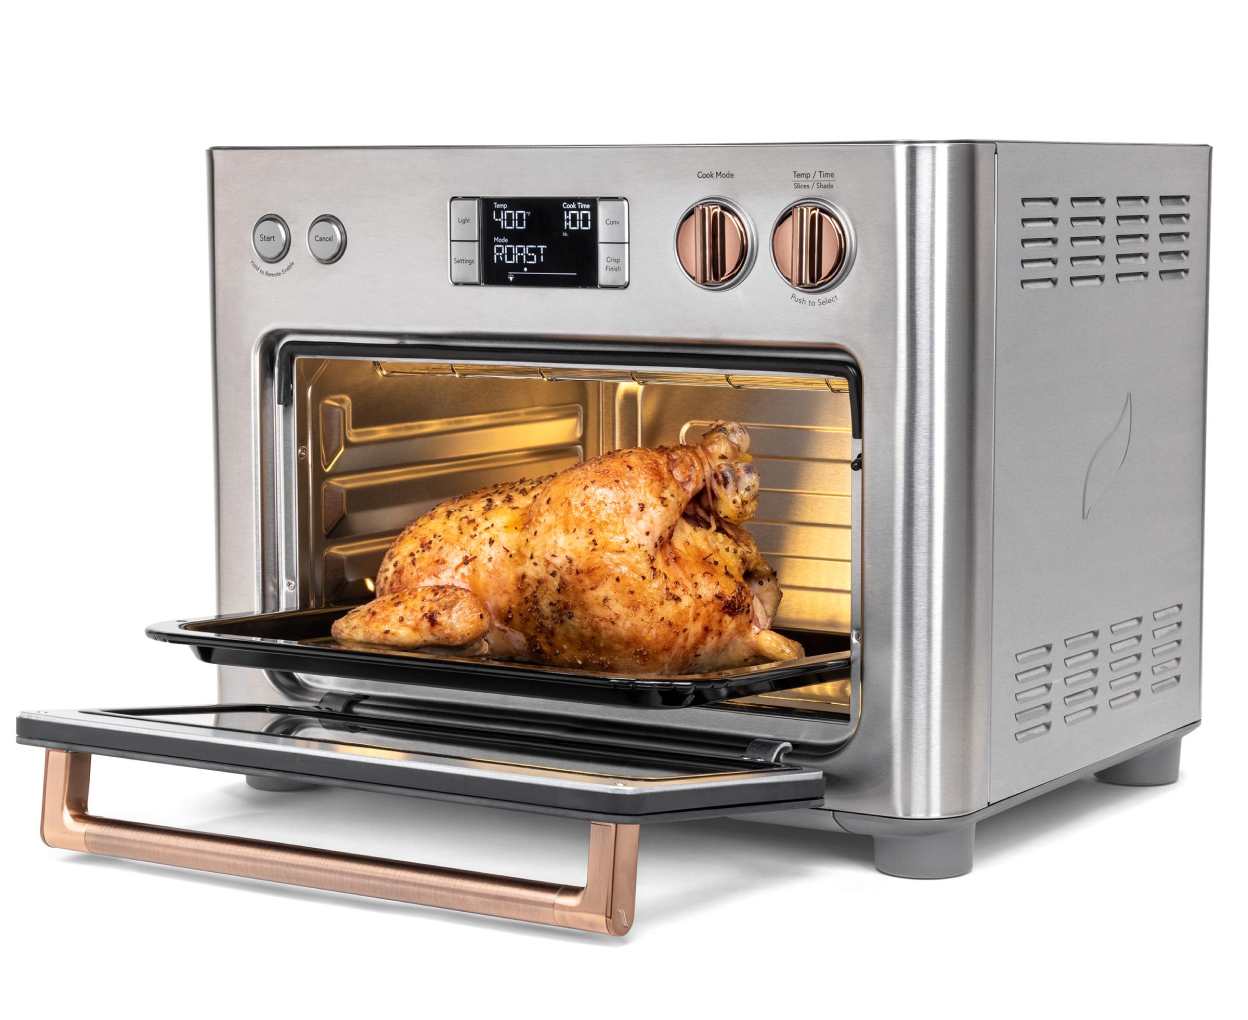 Oven cooking whole chicken